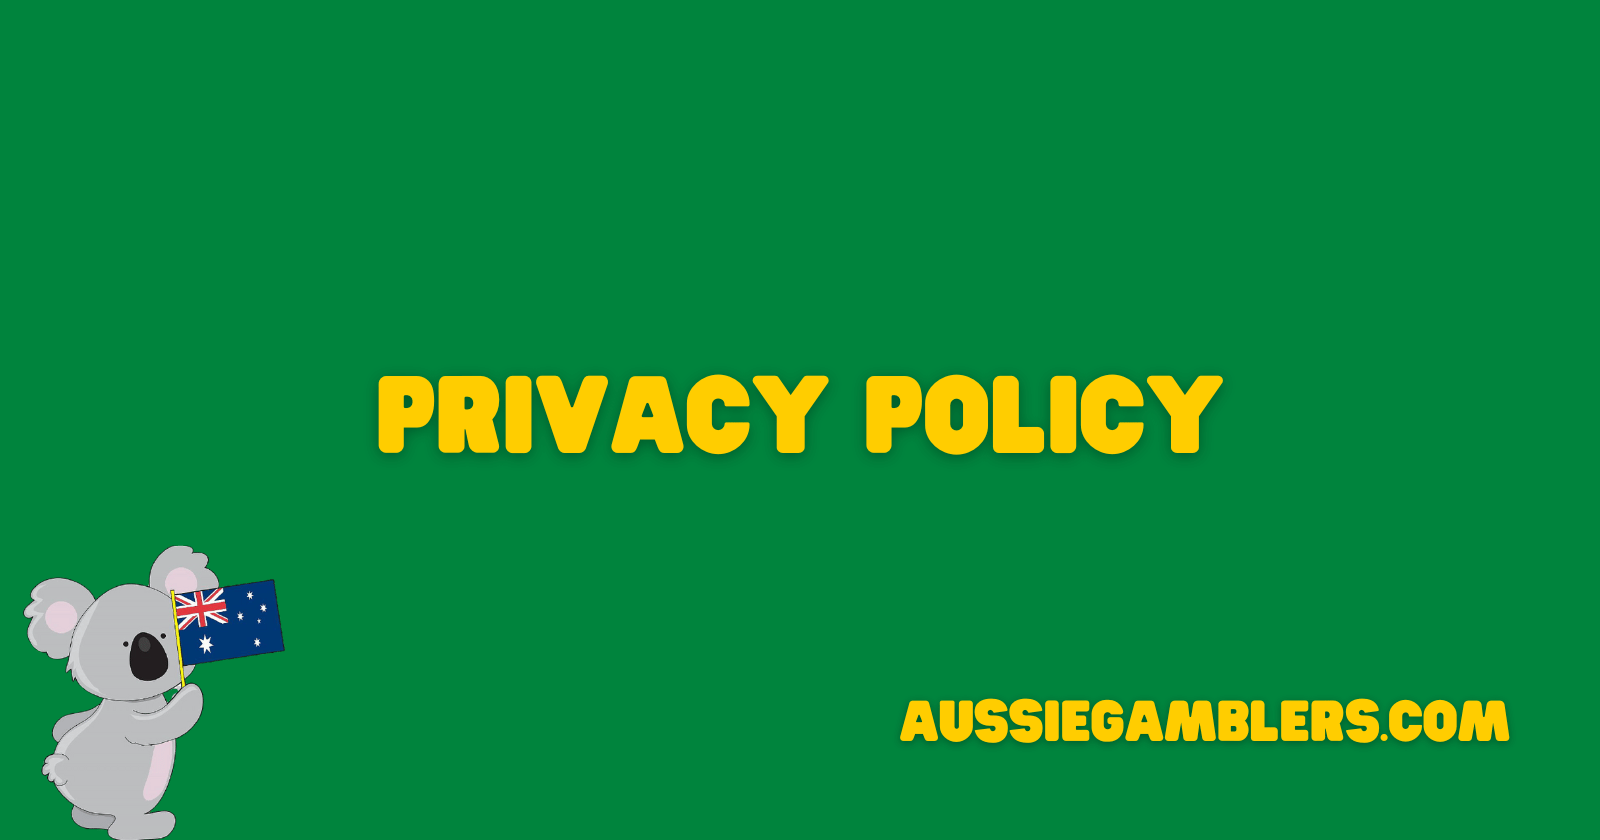 Privacy Policy banner